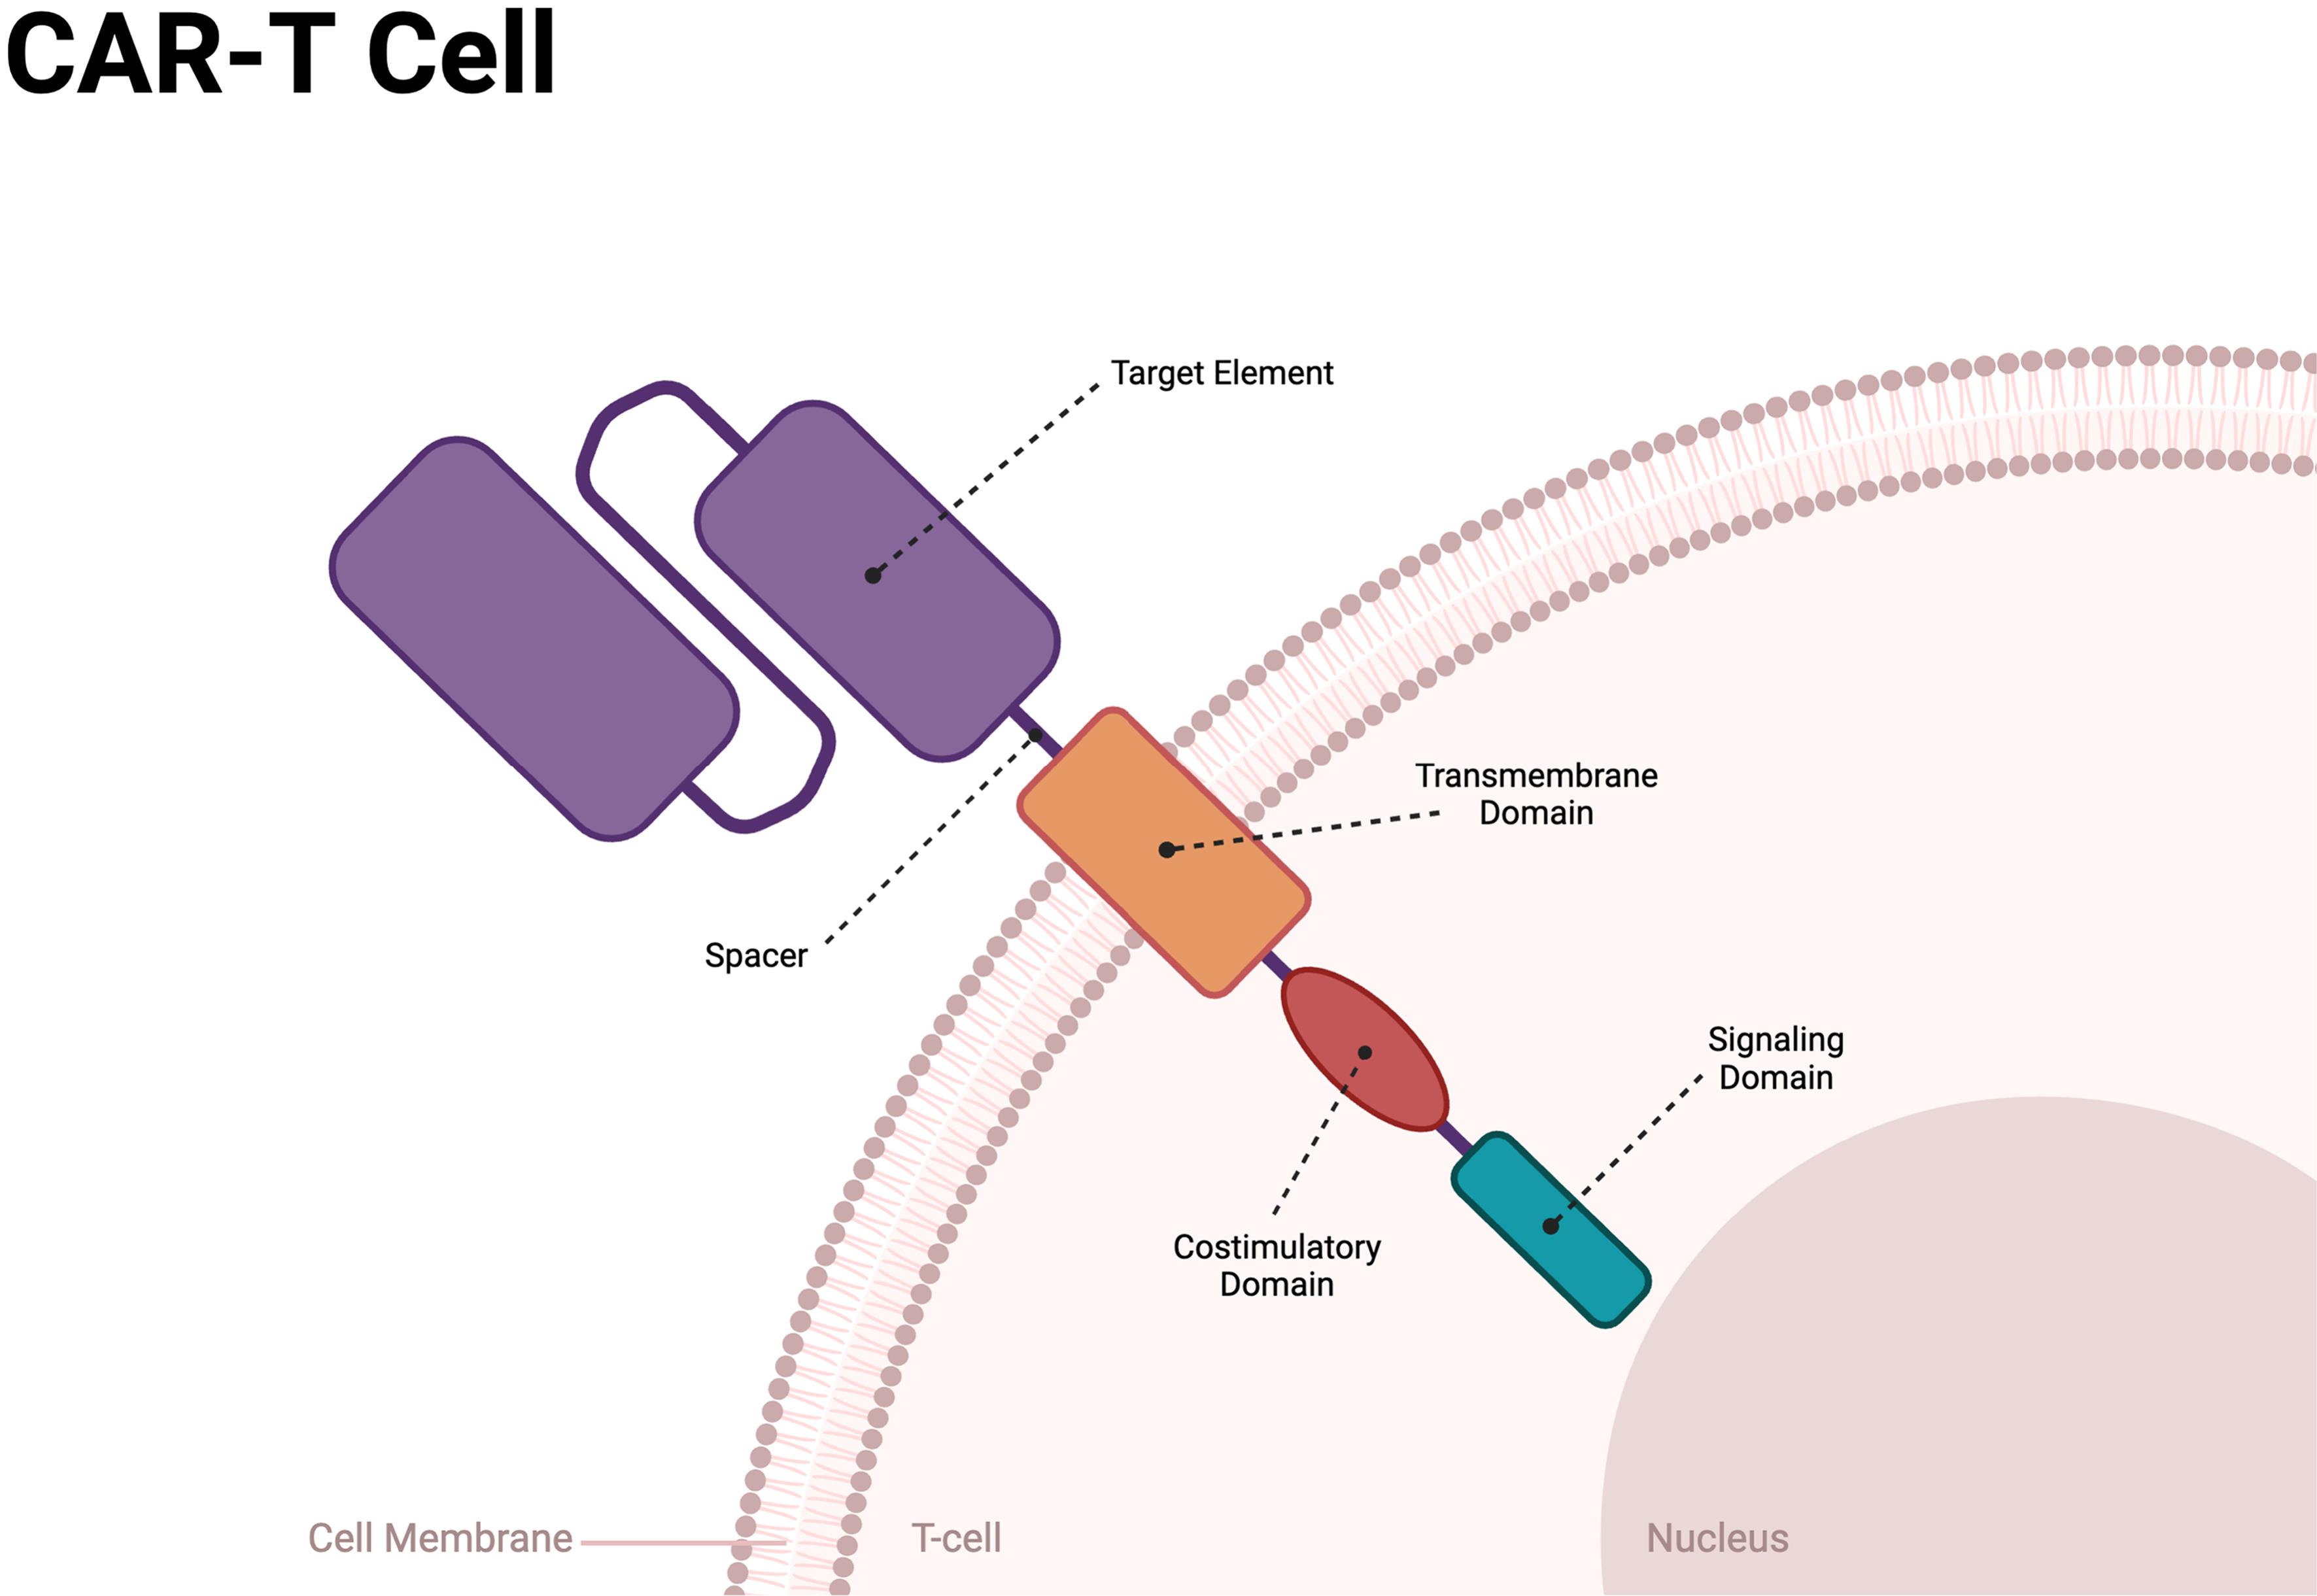 CAR T-cell construct.